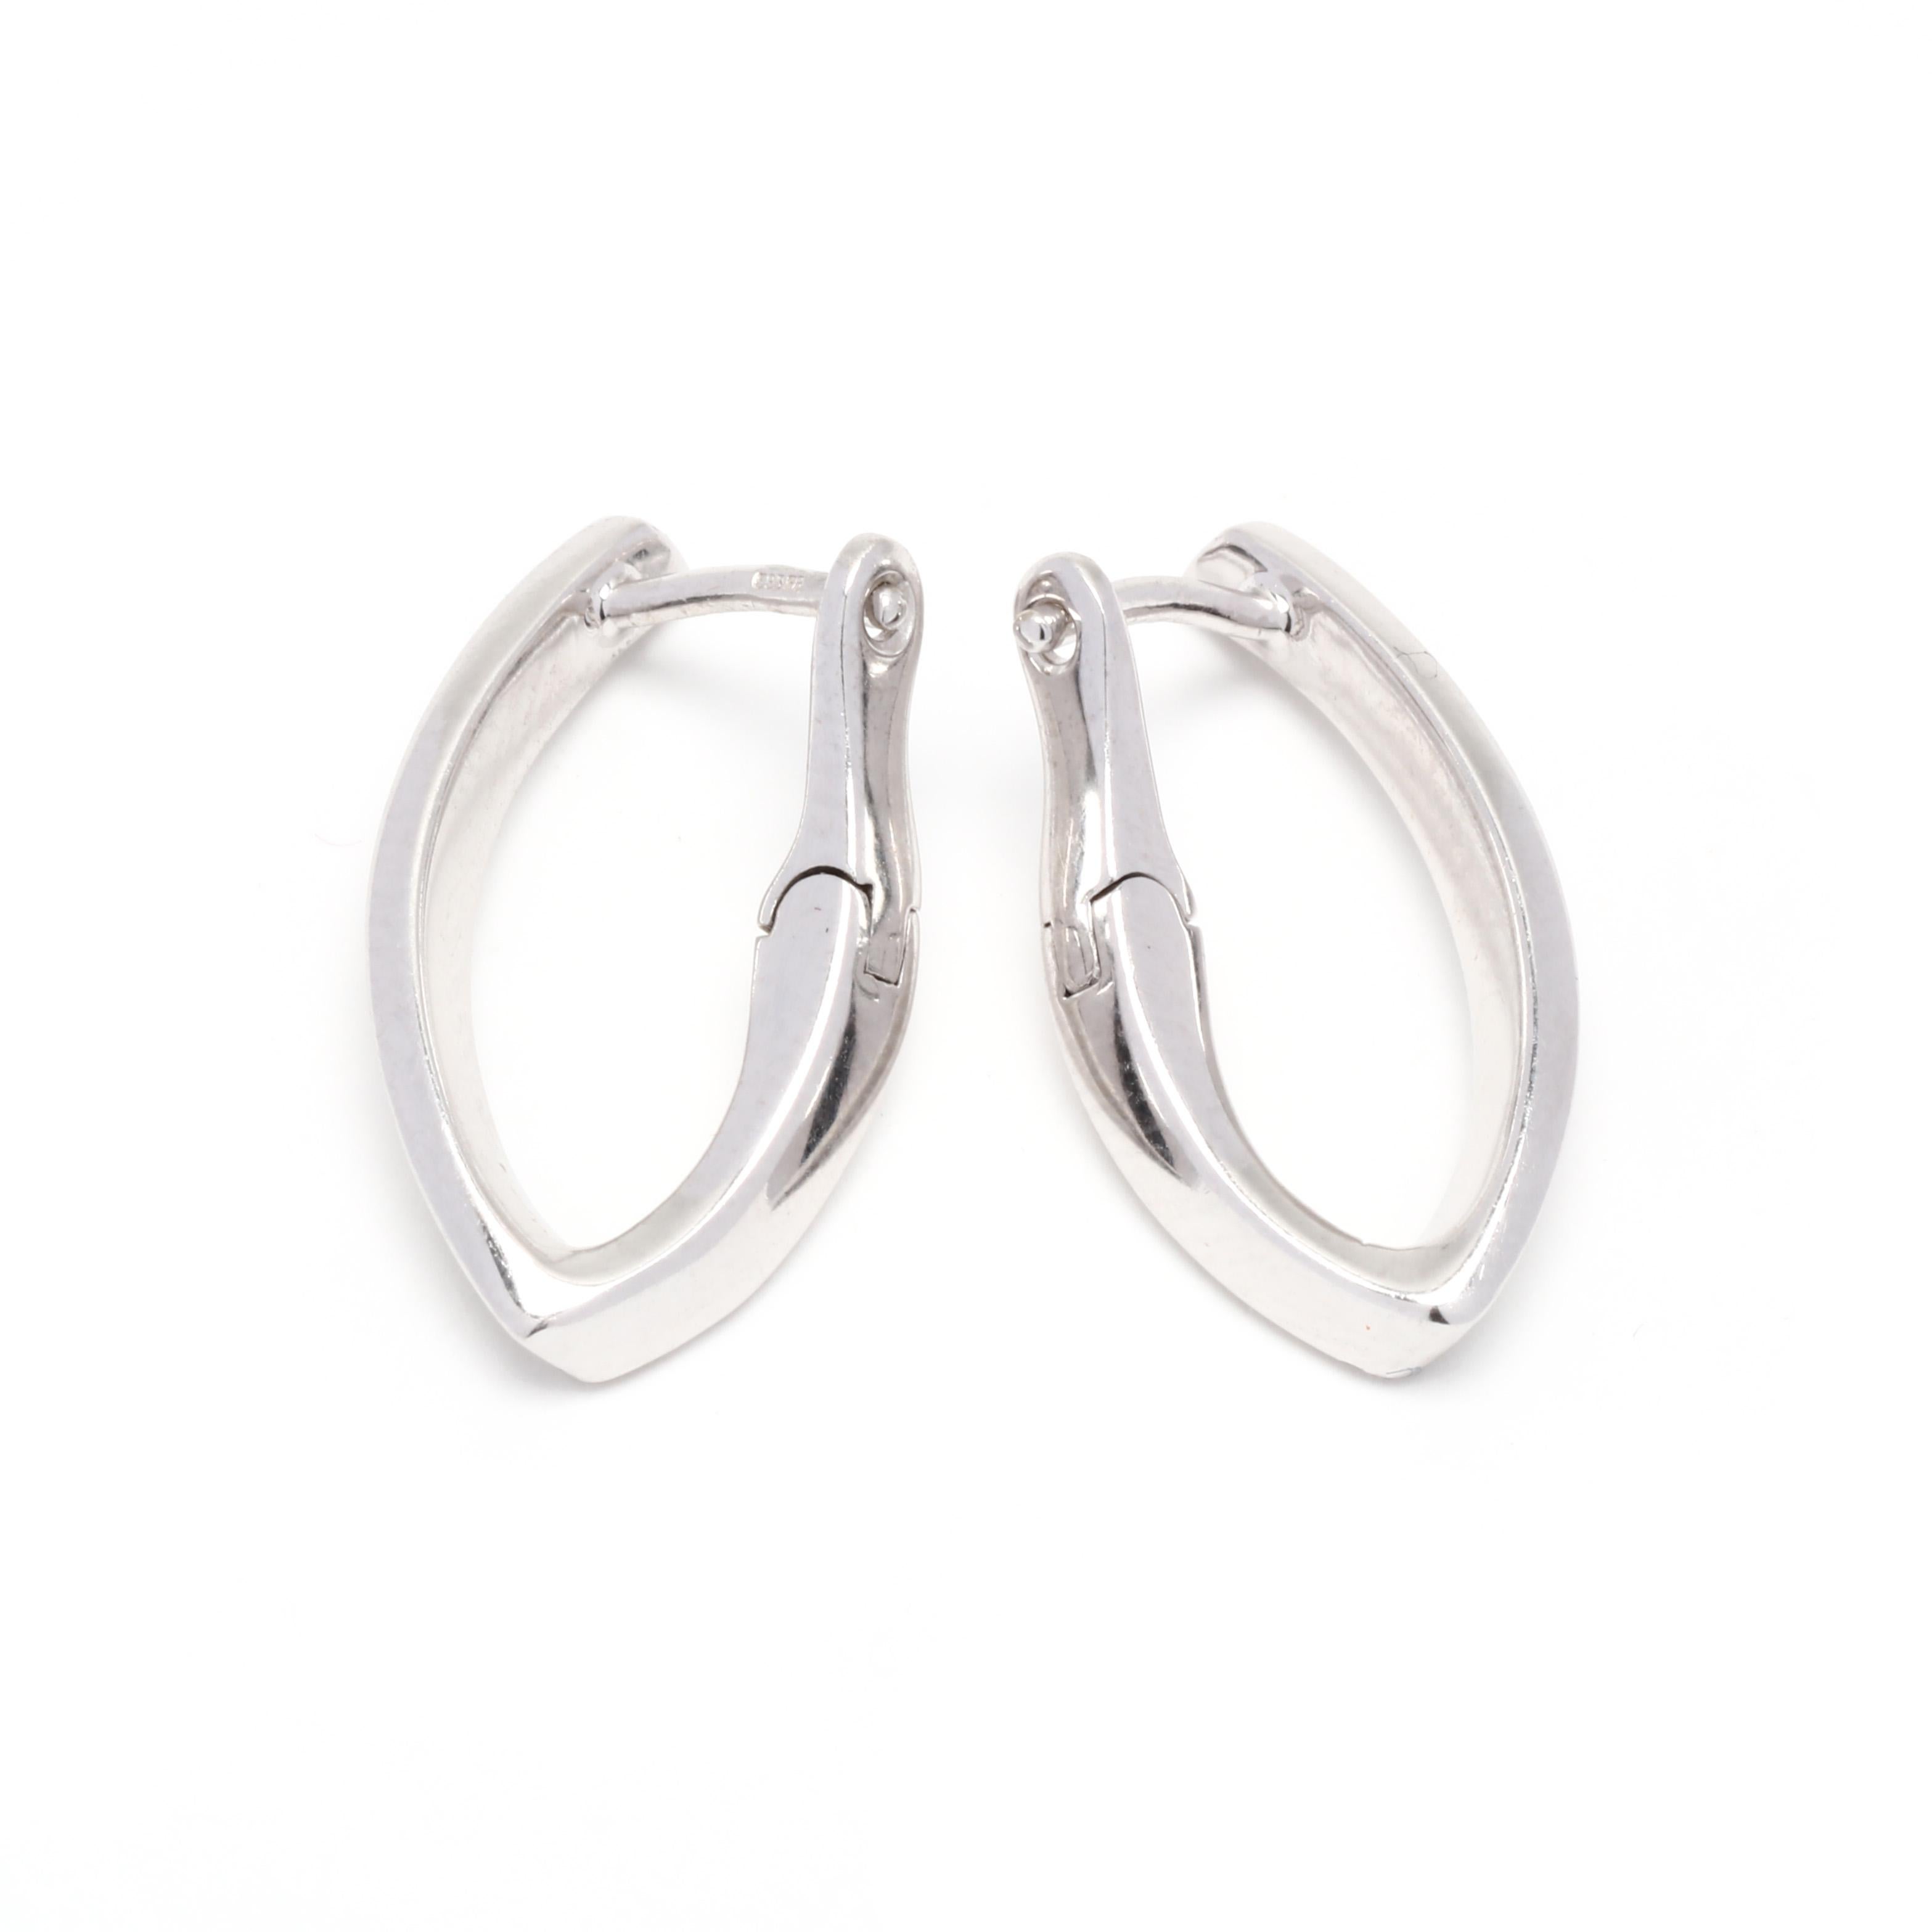 A pair of 14 karat white gold diamond V hoop earrings. These earrings feature a V shape set with full cut round diamonds weighing approximately .32 total carats and with a latch closure.

Stones:
- diamonds, 42 stones
- full cut round
- 1.1 mm
-